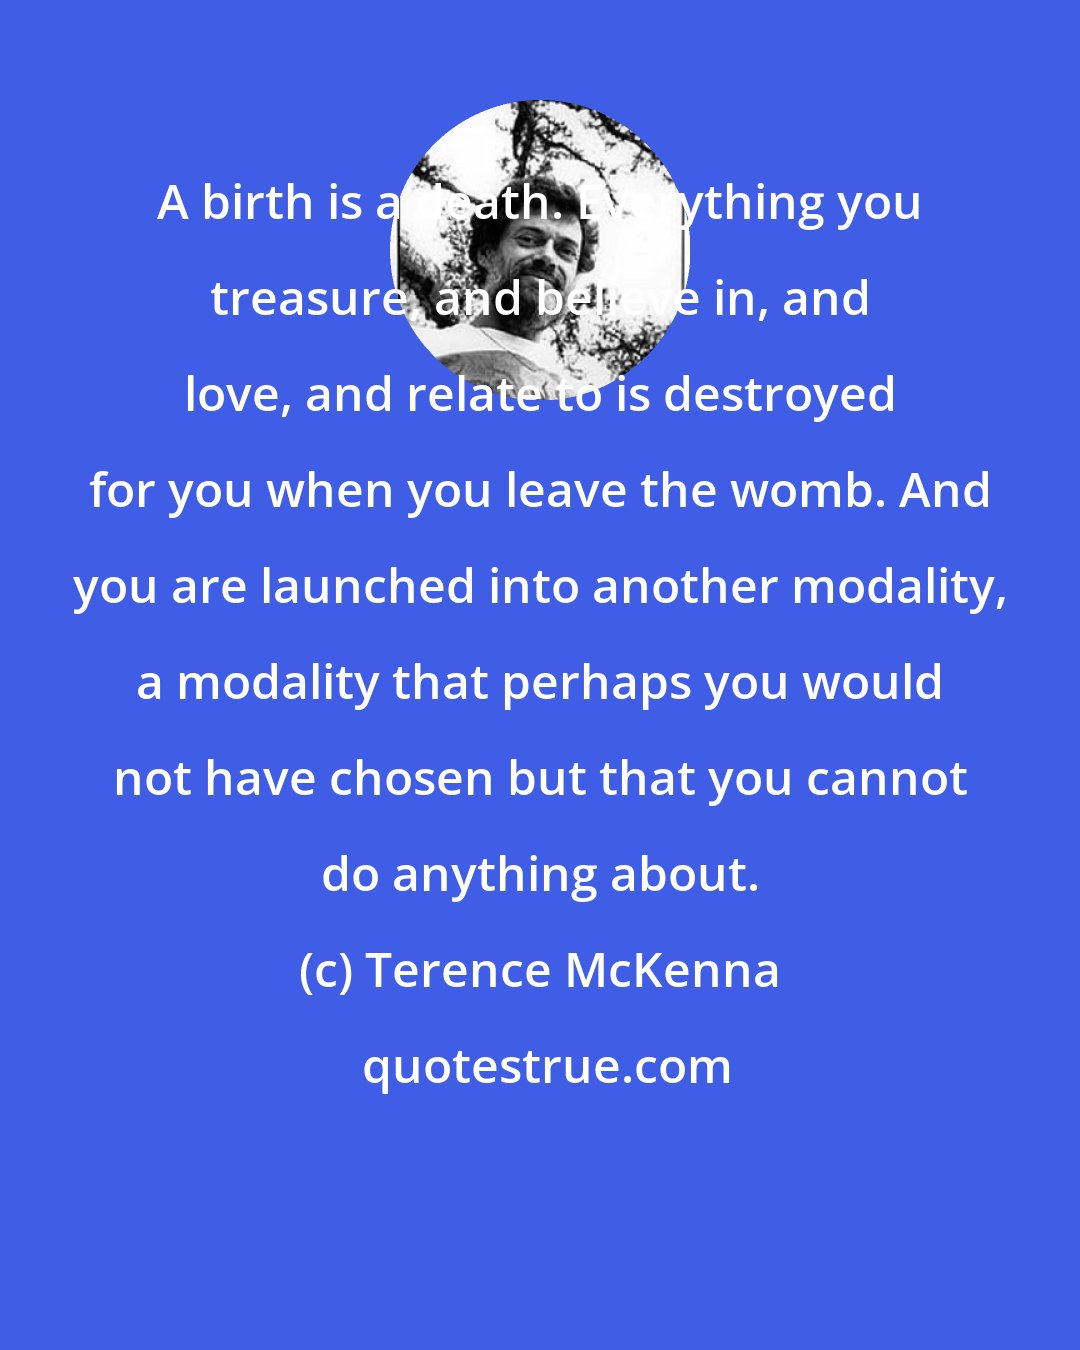 Terence McKenna: A birth is a death. Everything you treasure, and believe in, and love, and relate to is destroyed for you when you leave the womb. And you are launched into another modality, a modality that perhaps you would not have chosen but that you cannot do anything about.